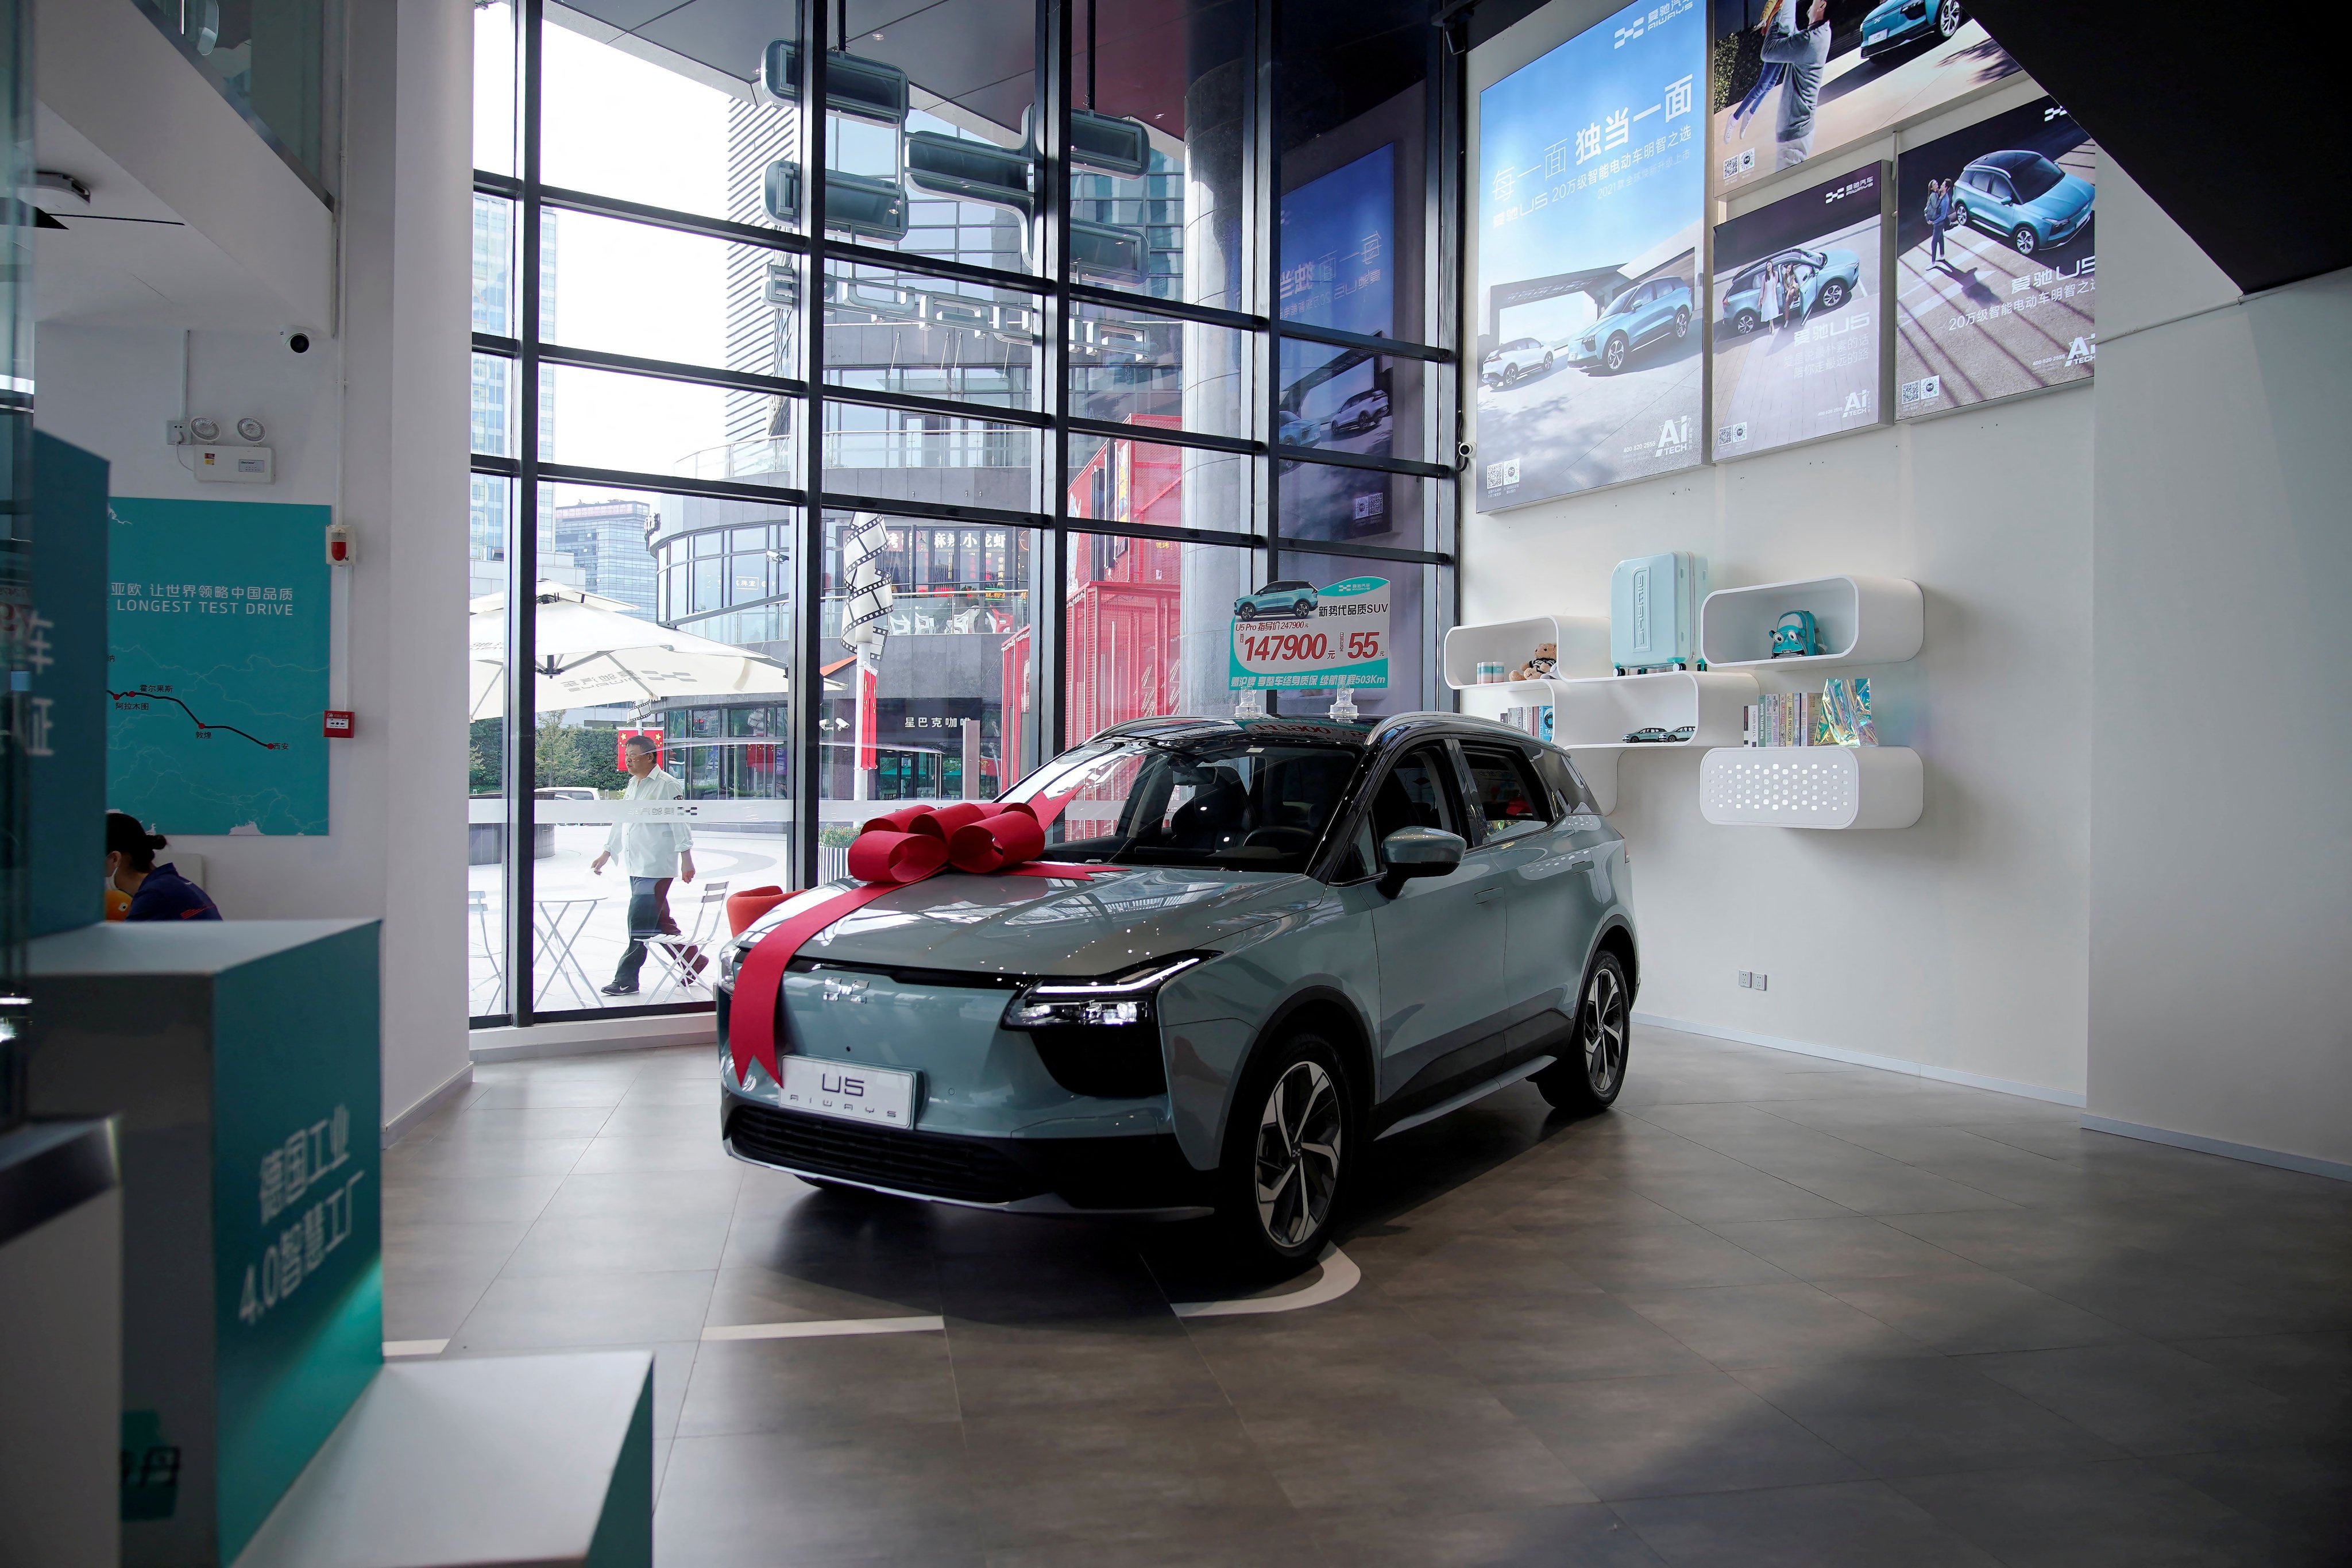 An Aiways U5 electric car on display at a company store in Shanghai. Photo: Reuters